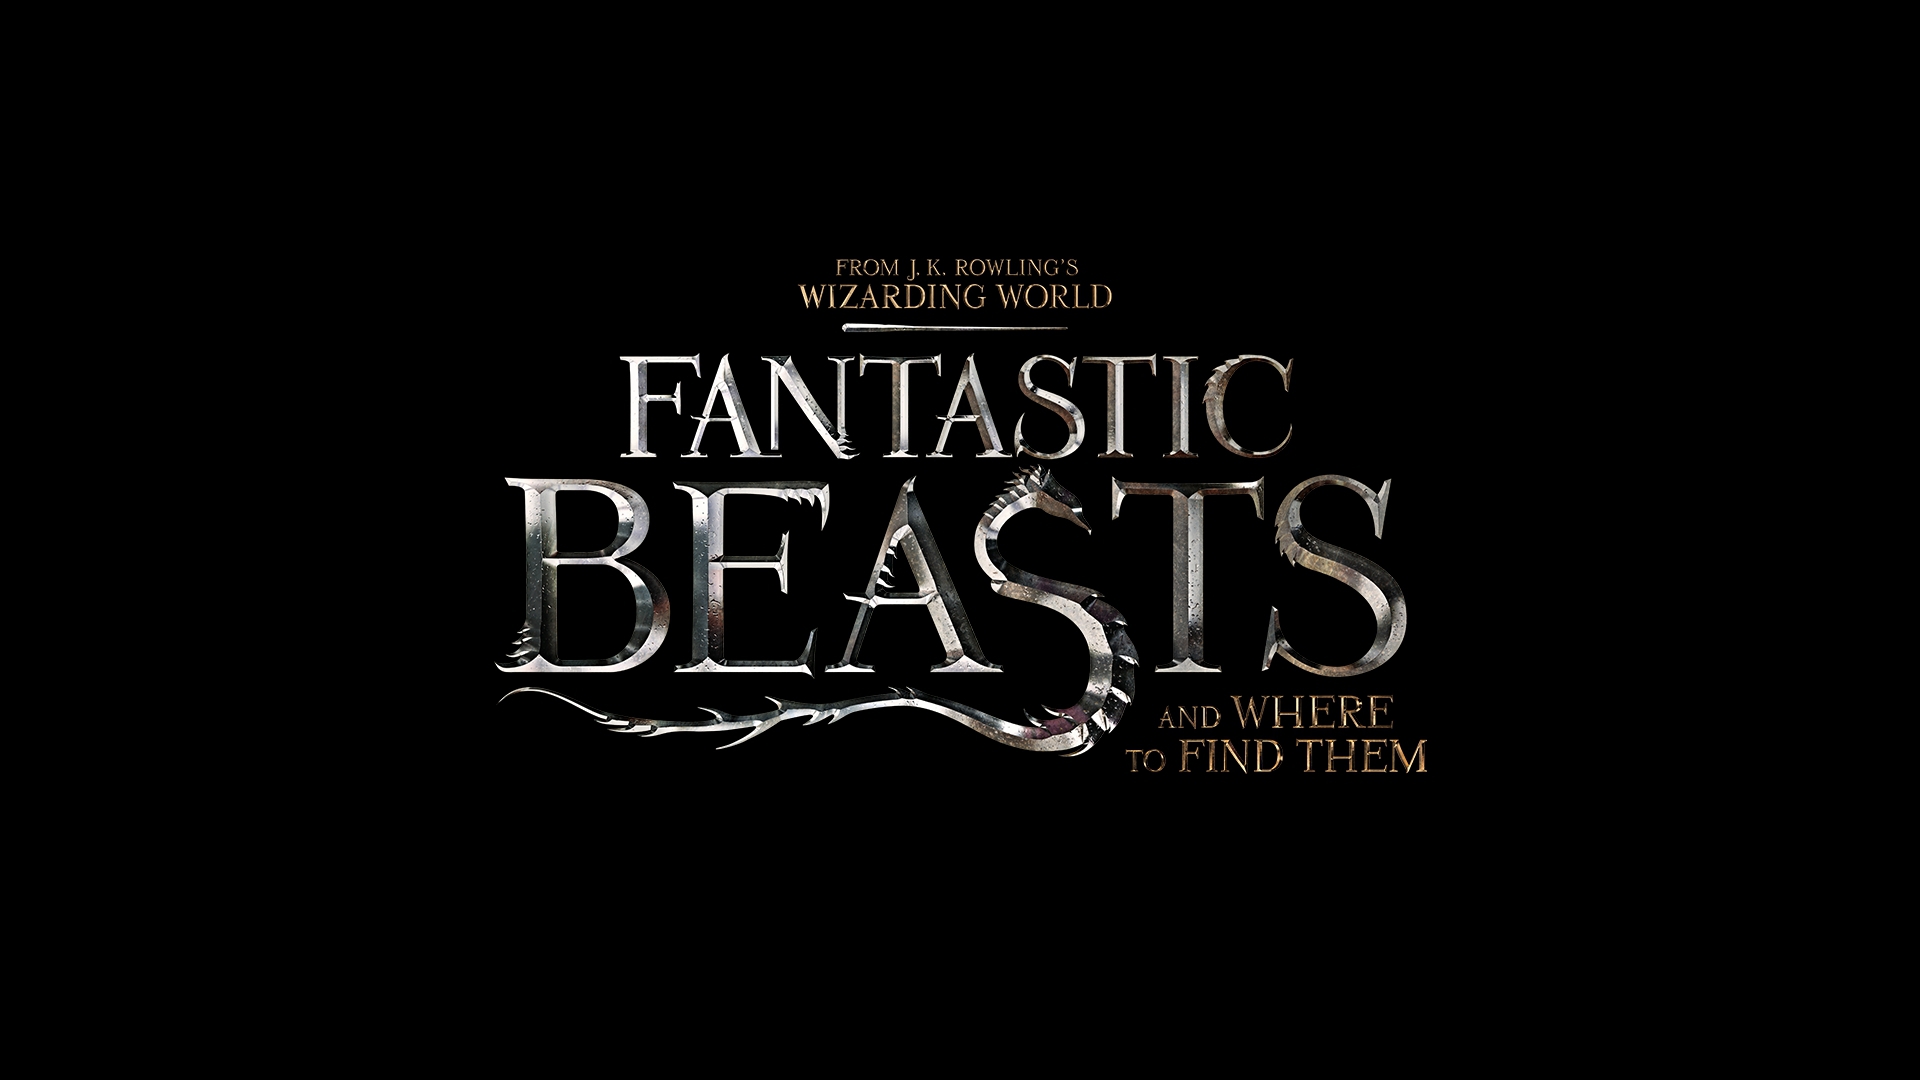 Watch Full HD 2016 Fantastic Beasts And Where To Find Them Movie Online